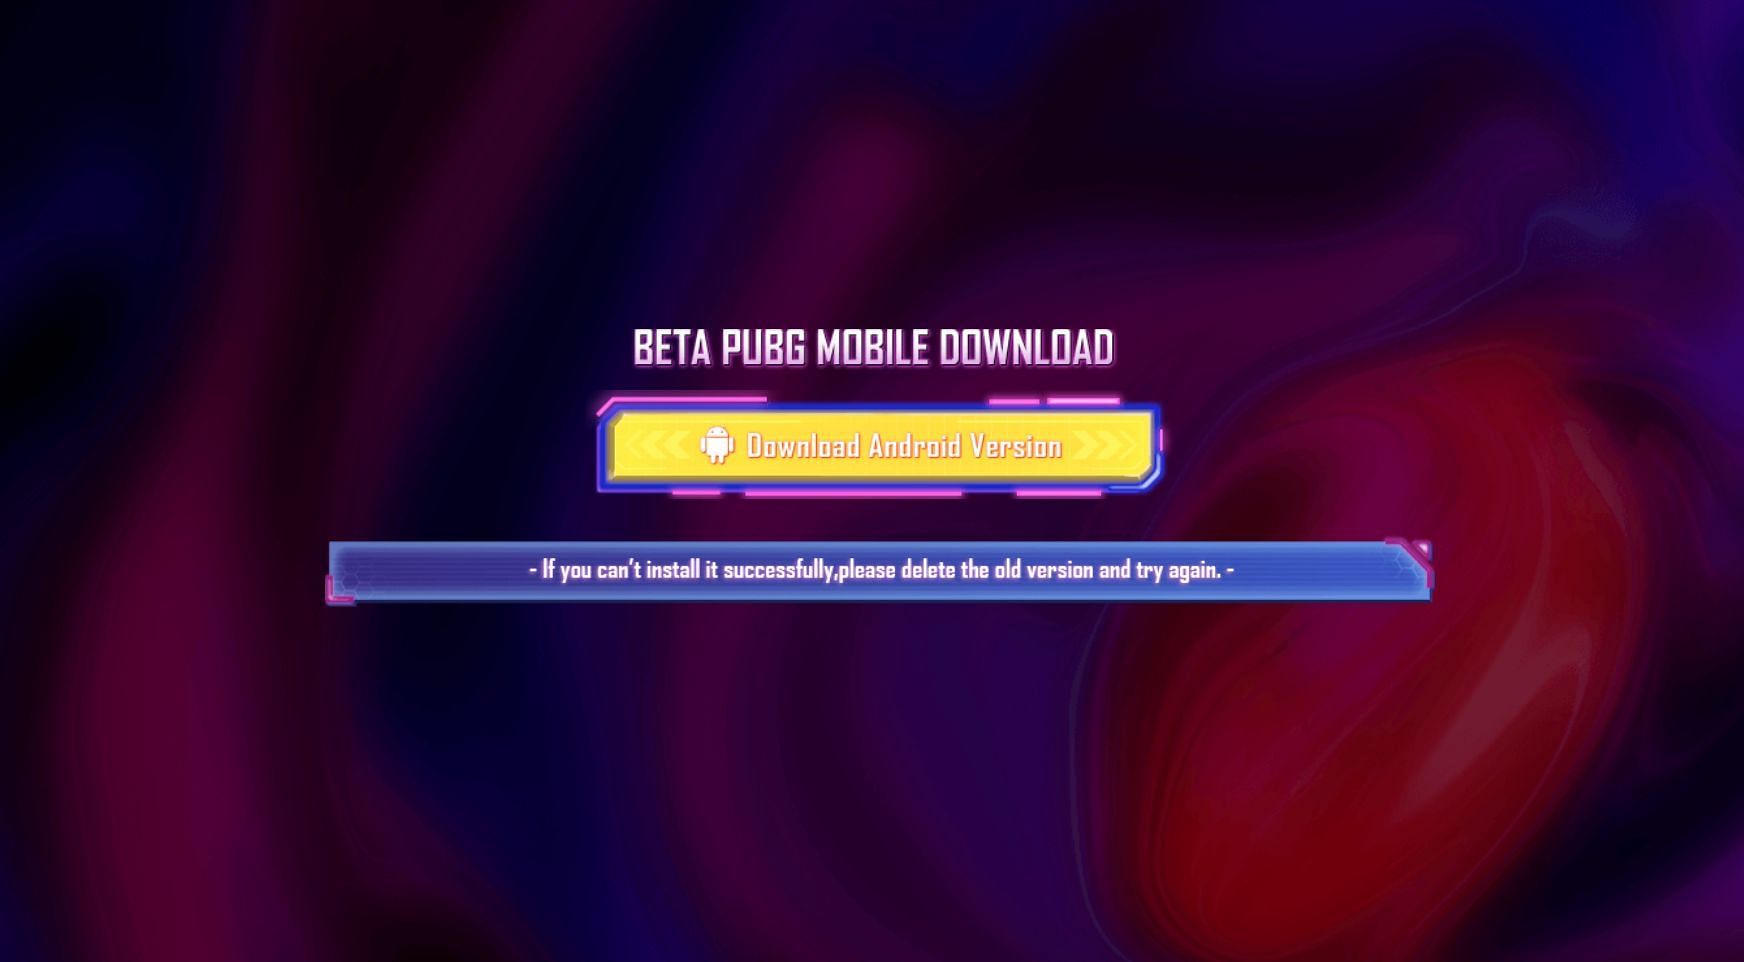 The APK file can be used to download and install the 3.0 beta (Image via PUBG Mobile)